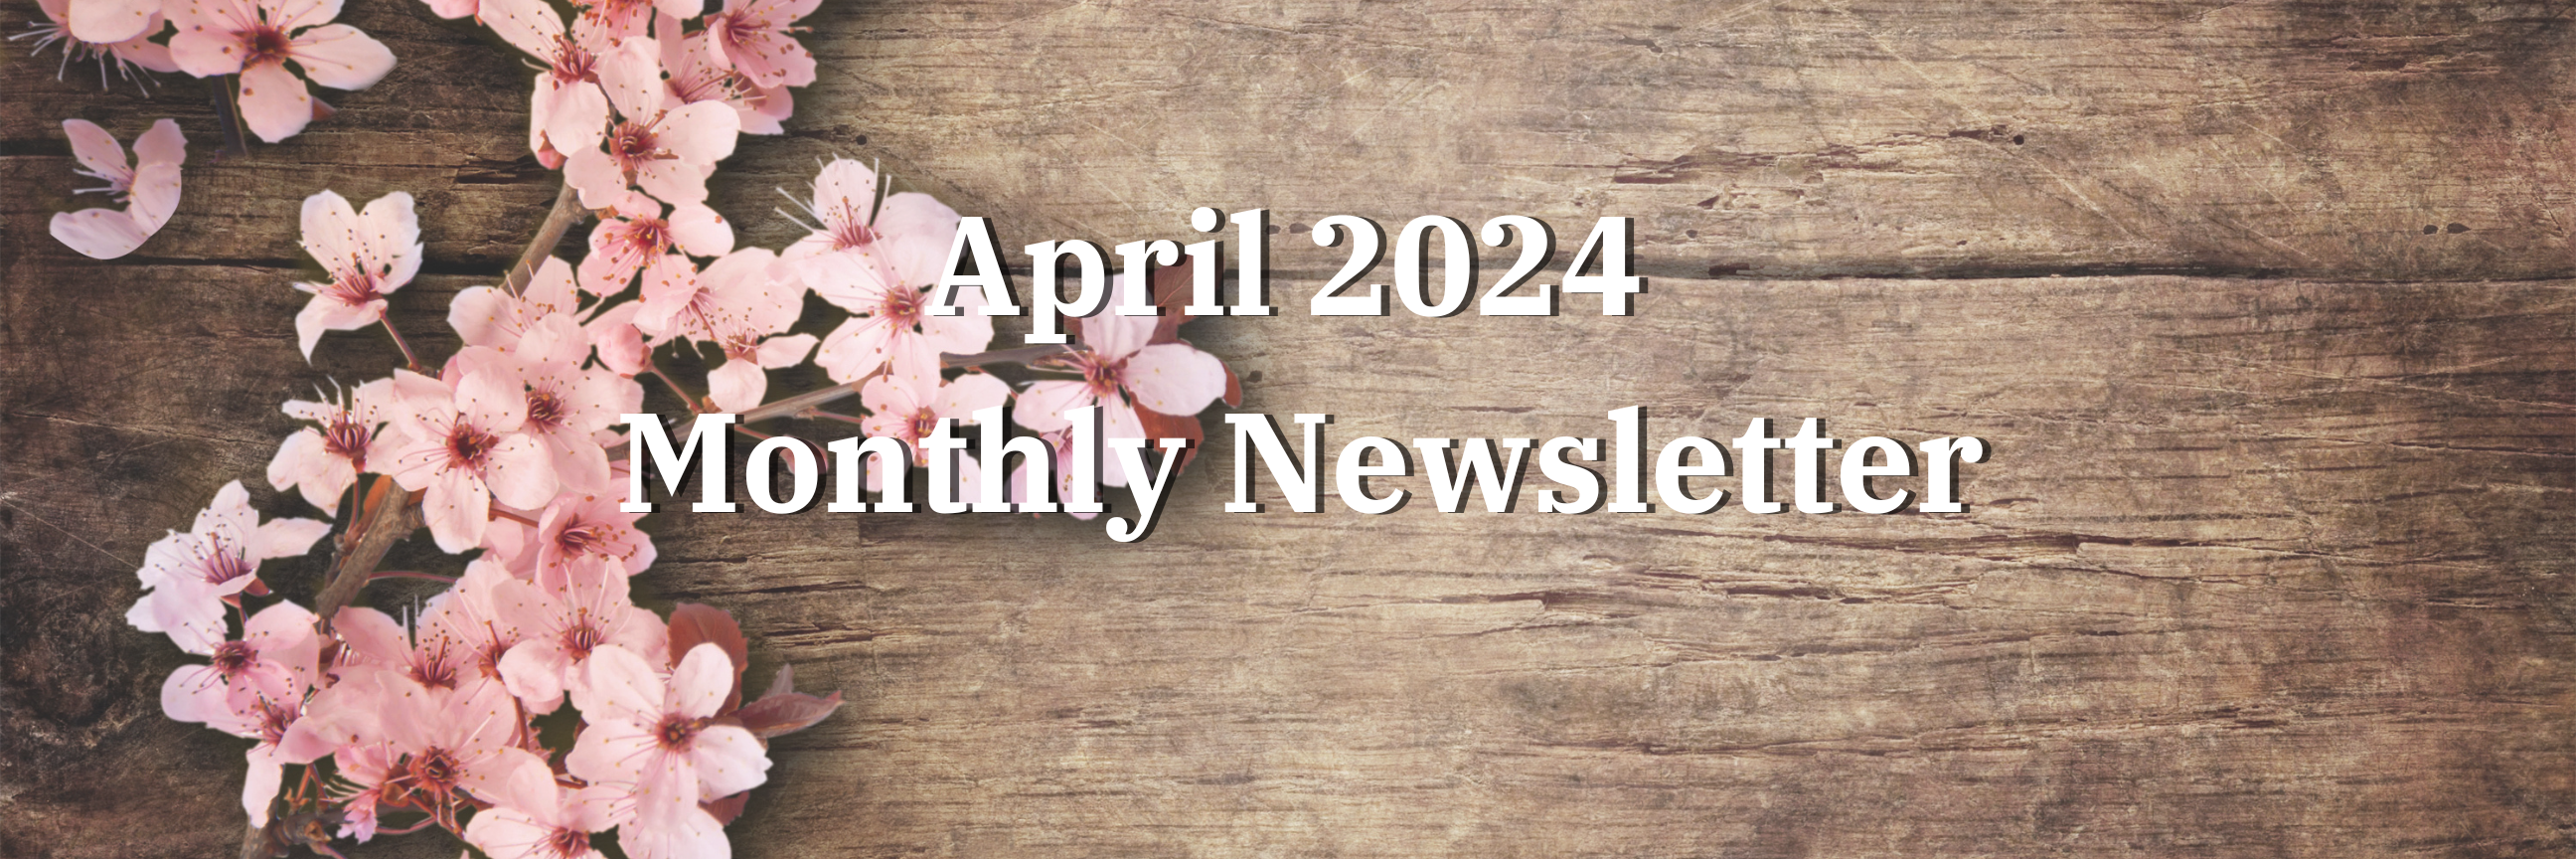 April 2024 Monthly Newsletter